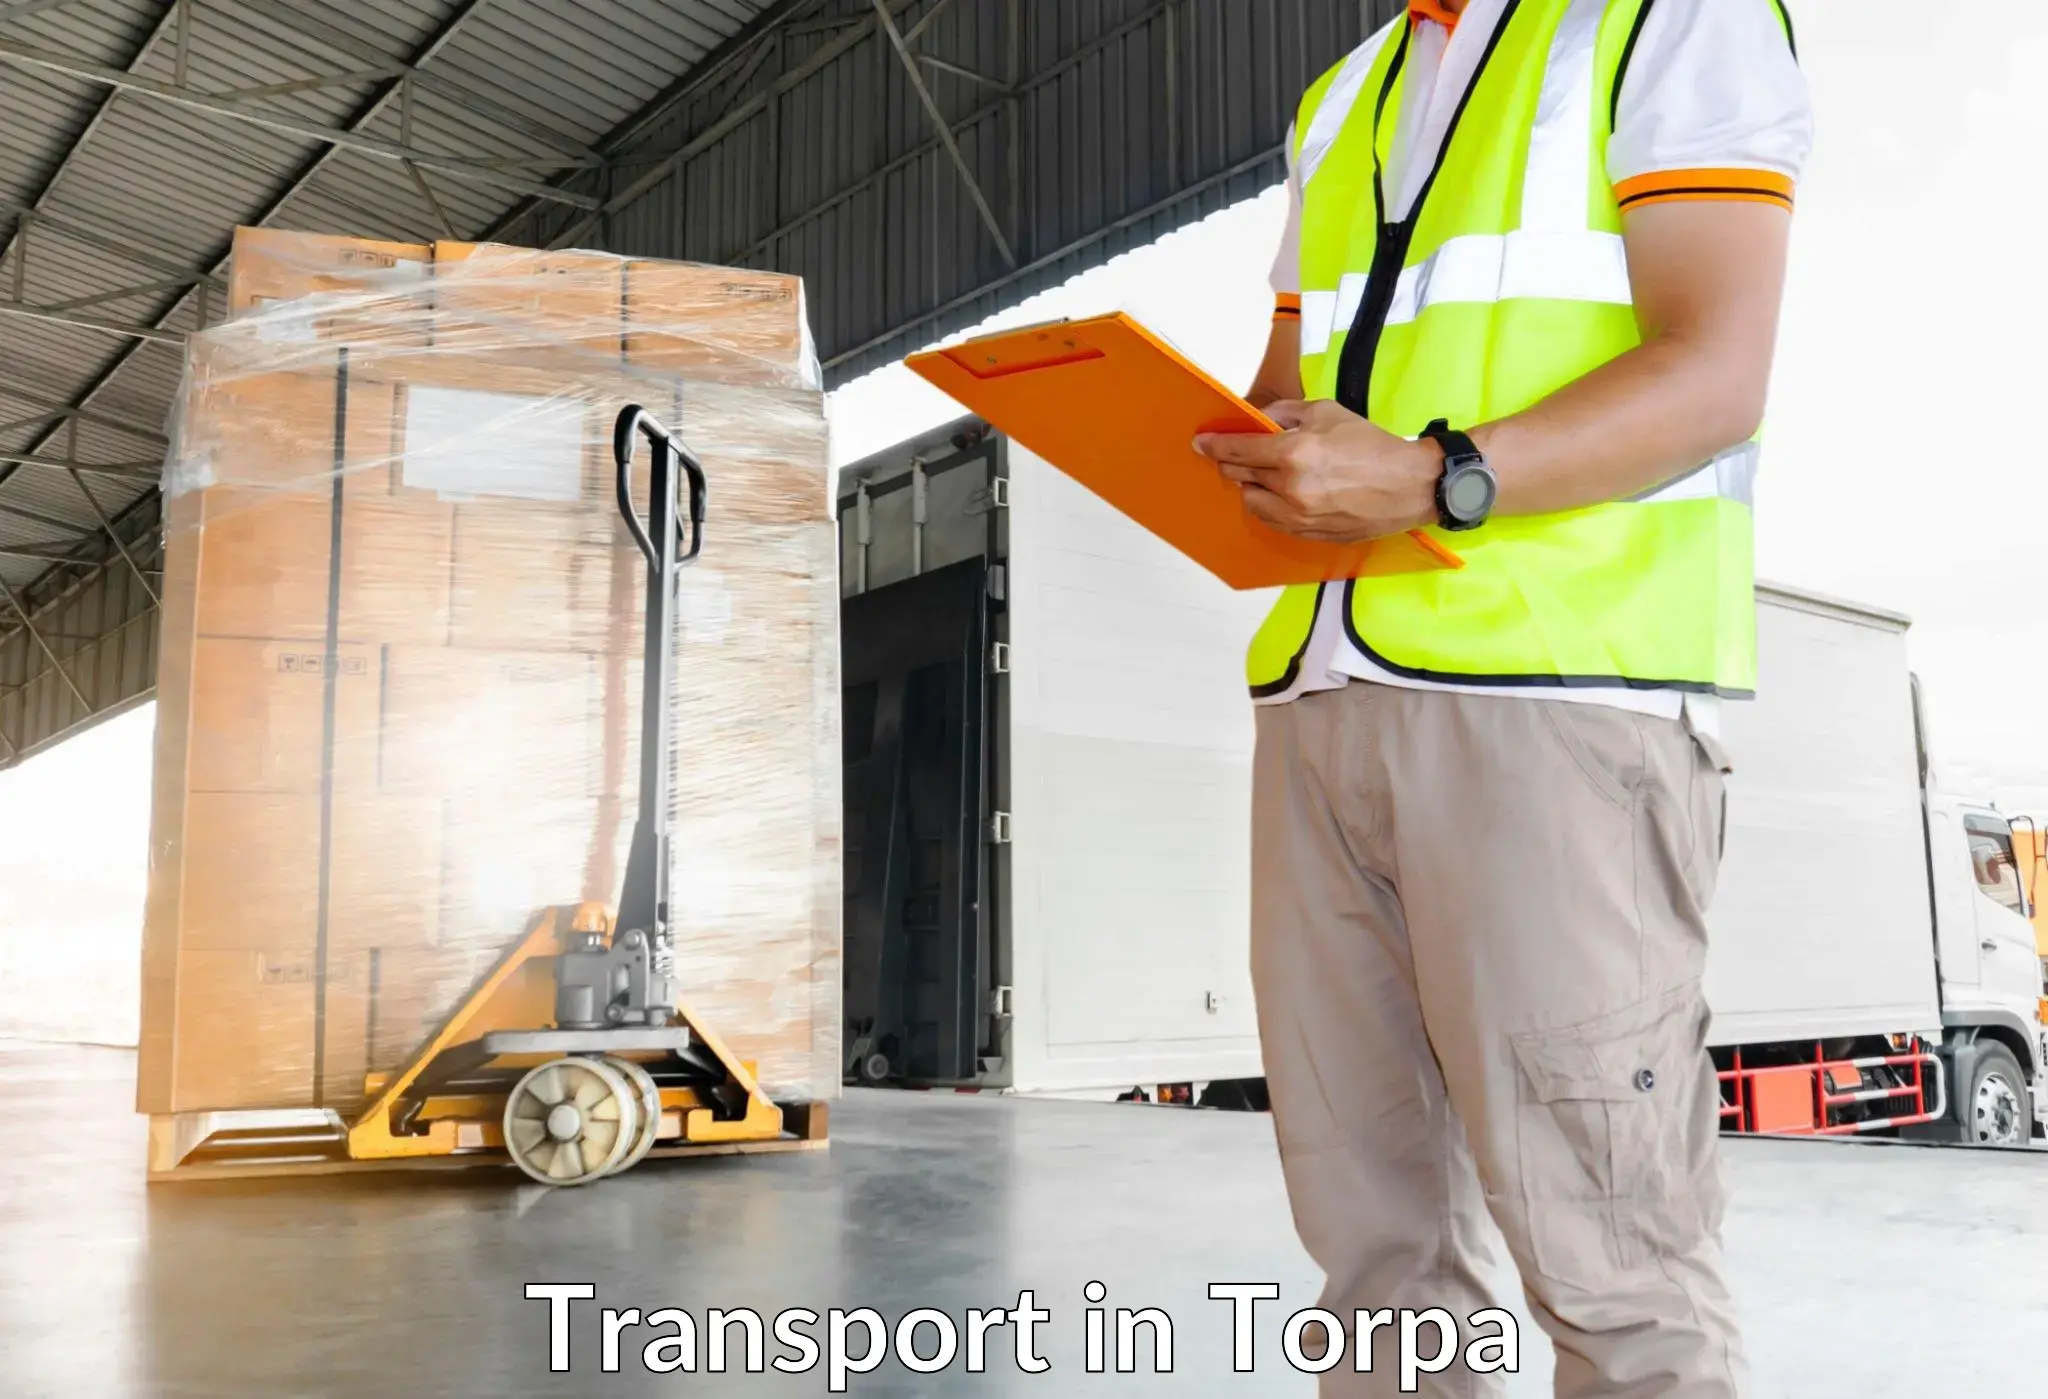 Goods delivery service in Torpa